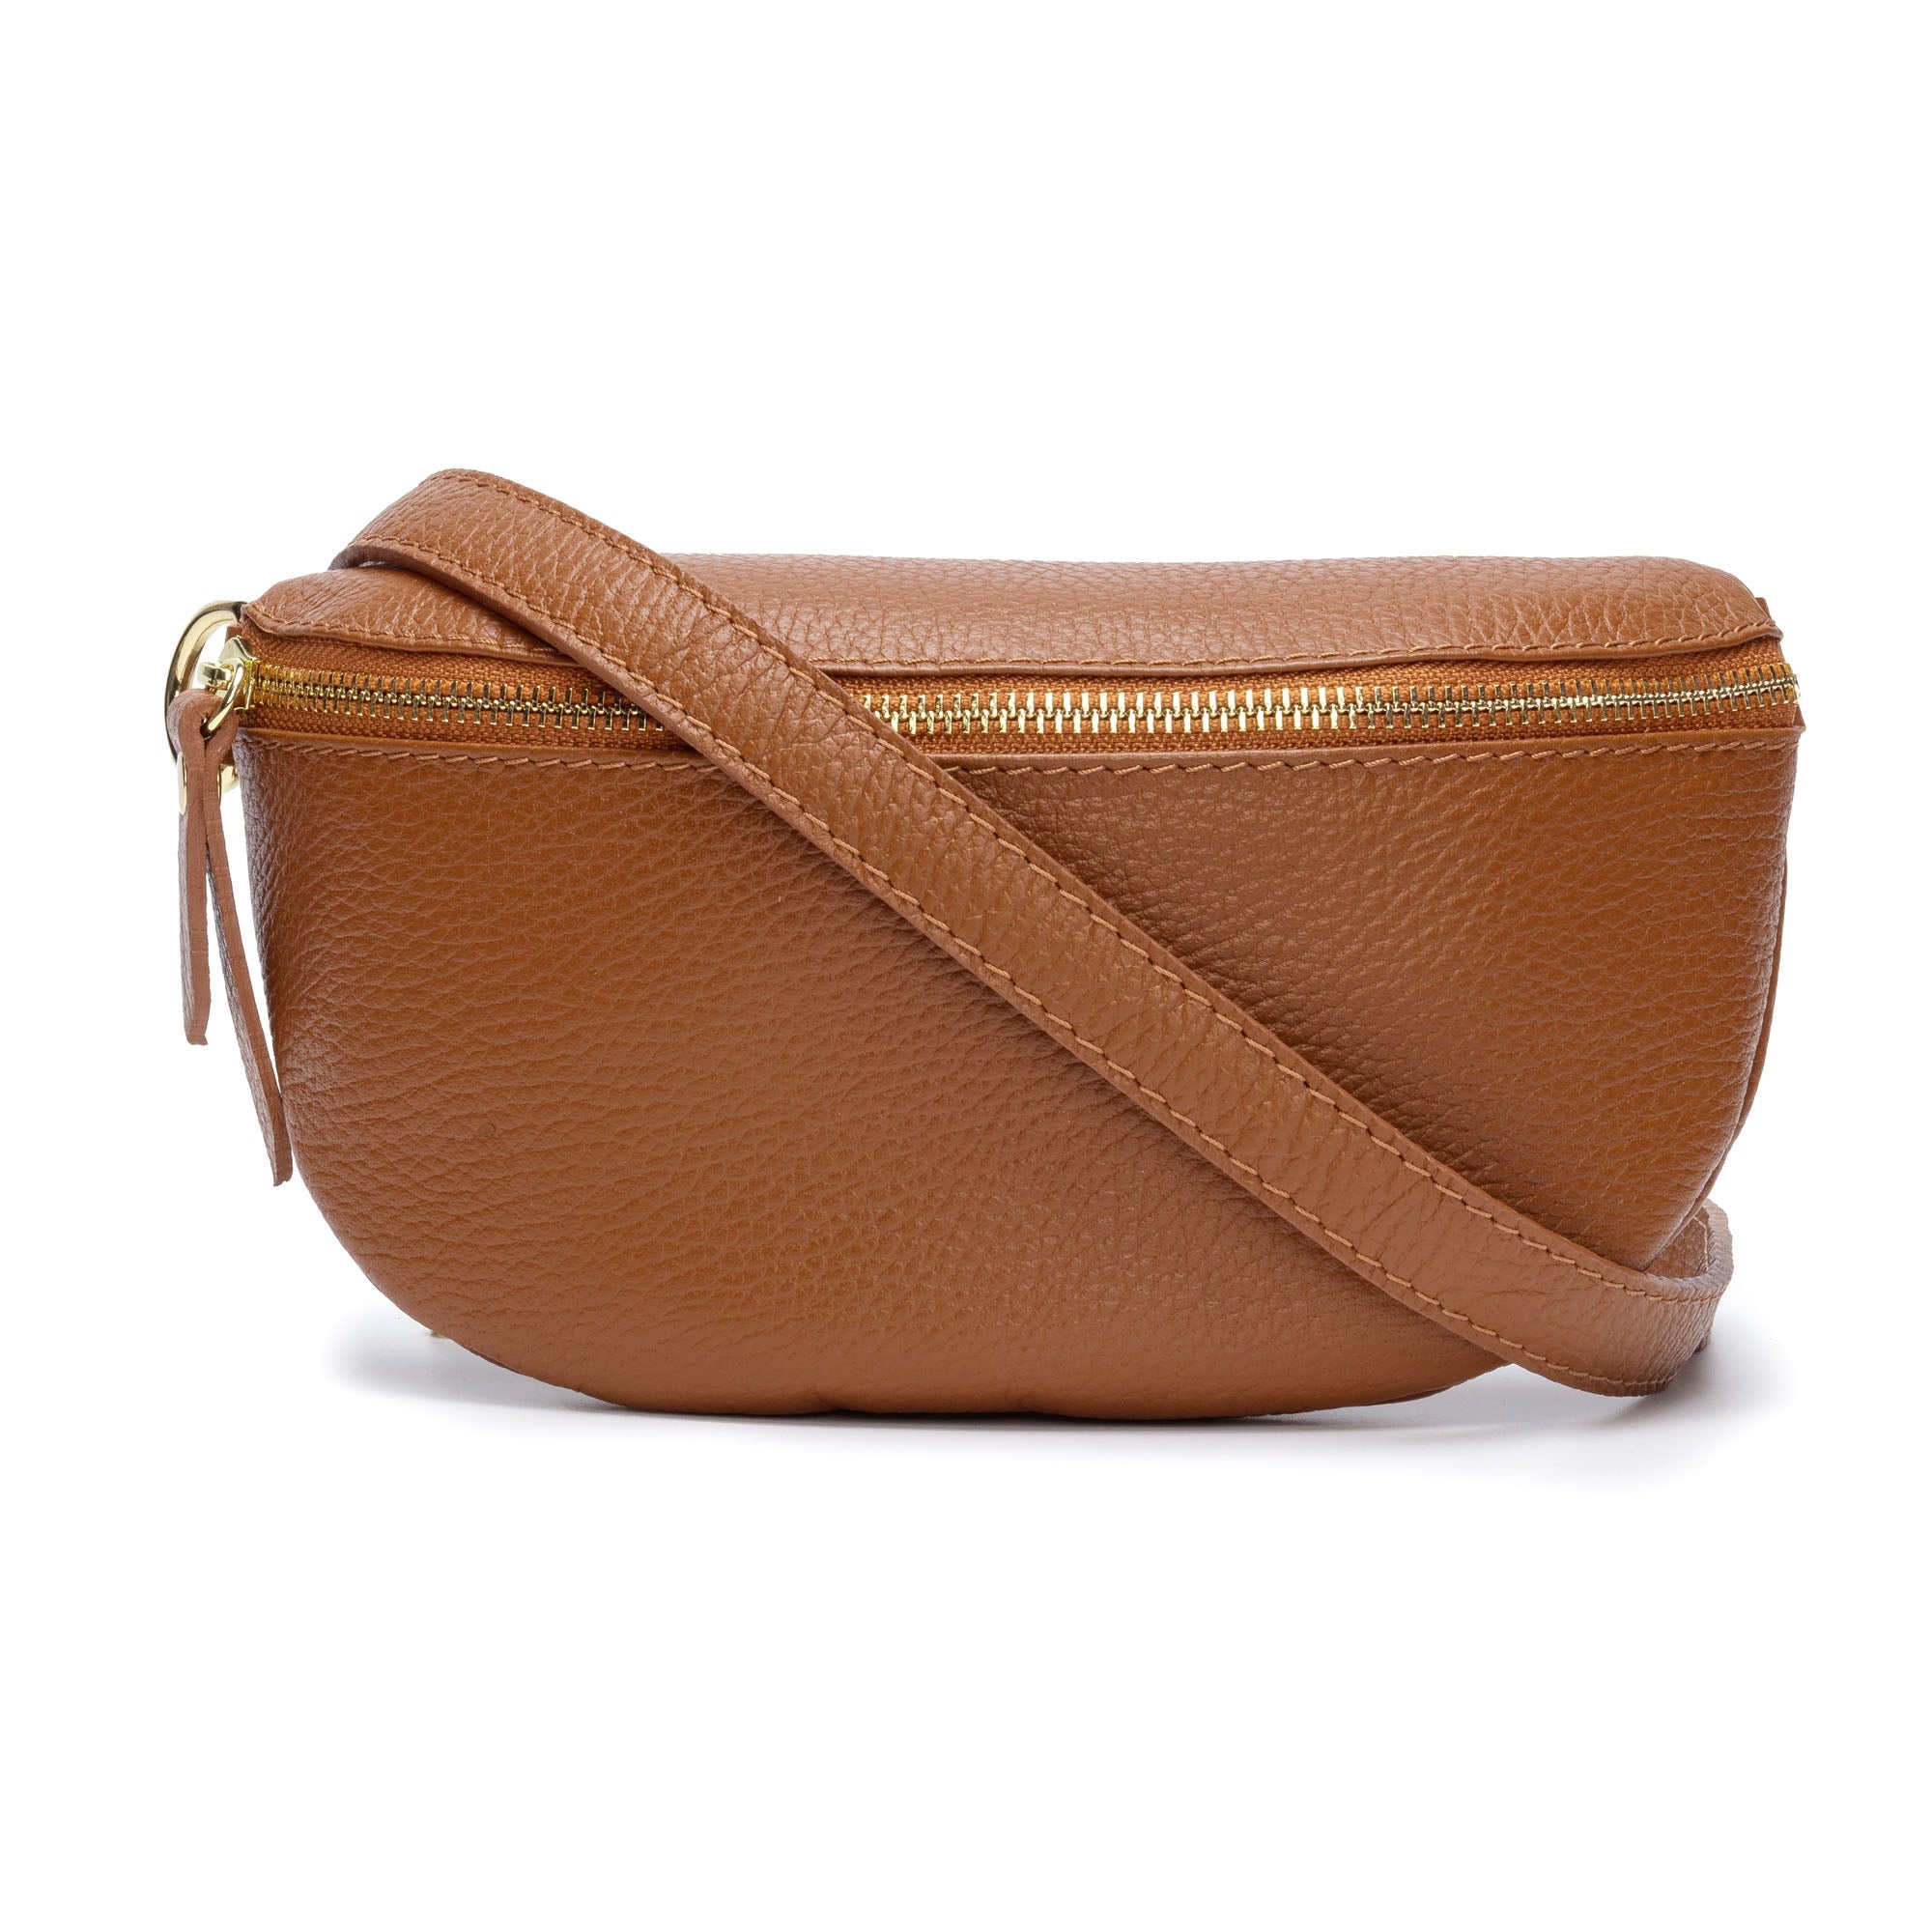 Sling Bag - Tan with Navy Copper Strap